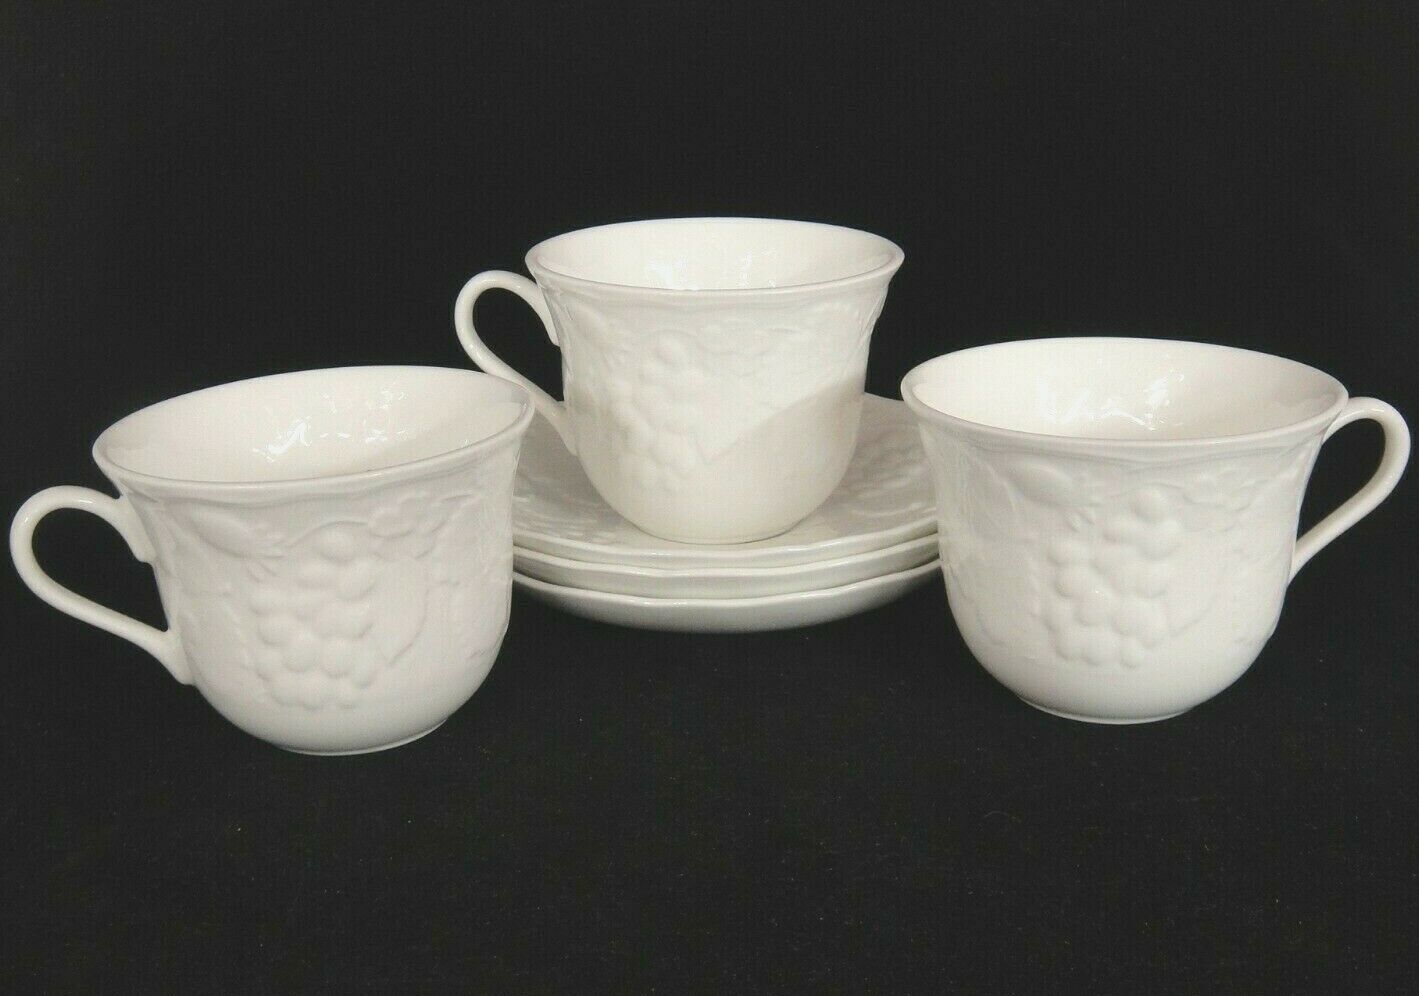 Primary image for Wedgwood Strawberry & Vine Lot of 3 Cups Saucers White Embossed Fruit England